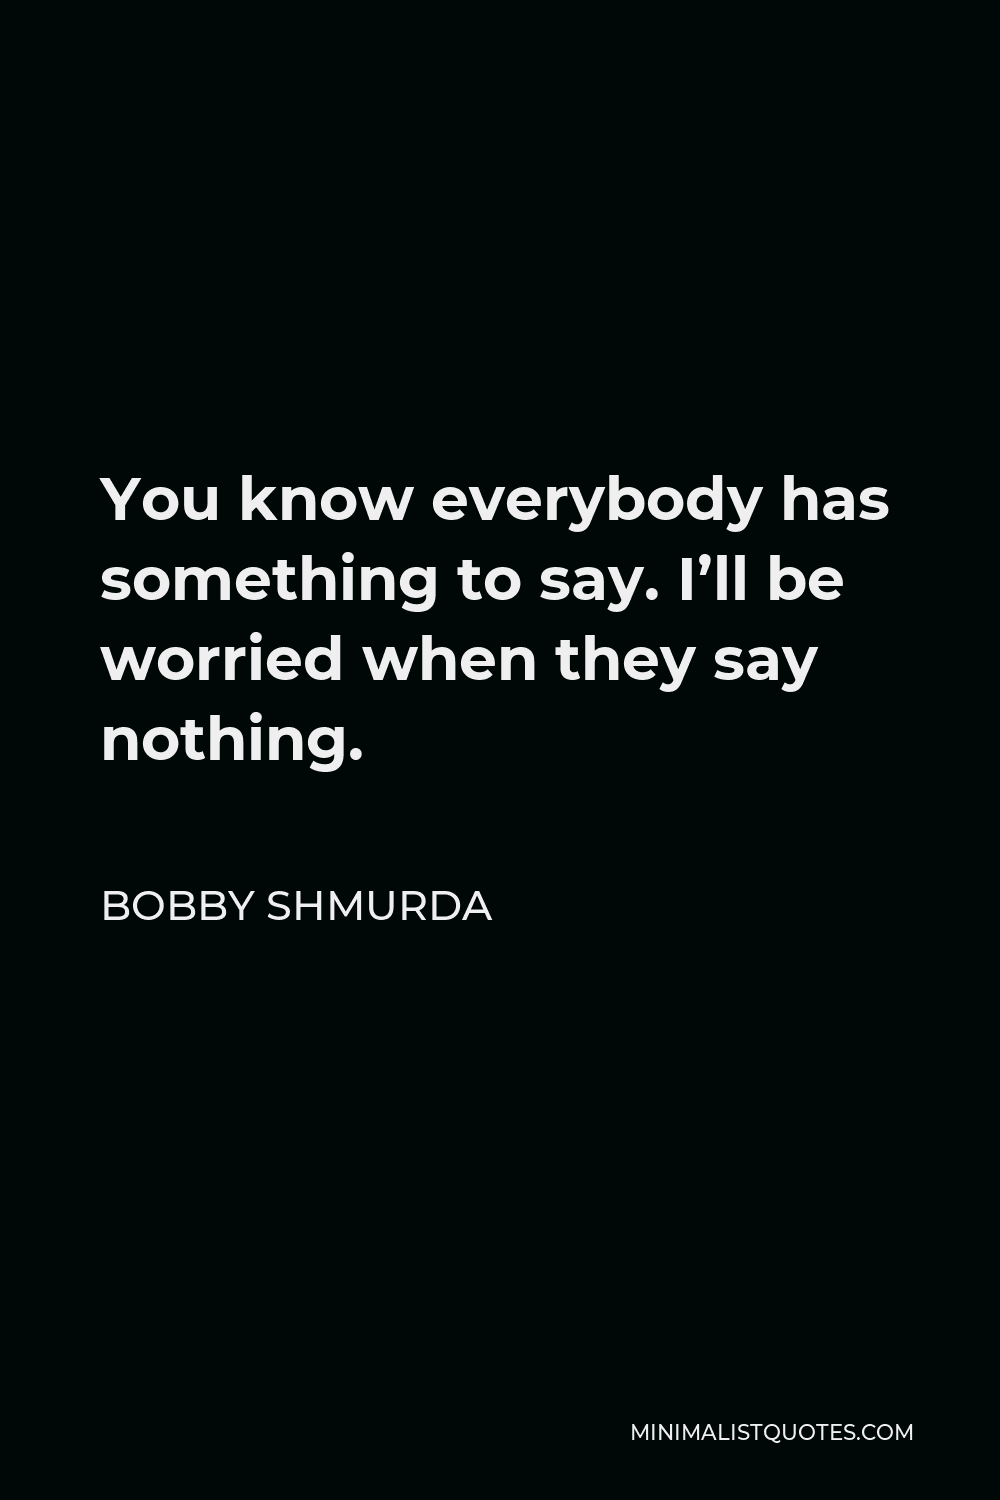 Bobby Shmurda Quote - You know everybody has something to say. I’ll be worried when they say nothing.